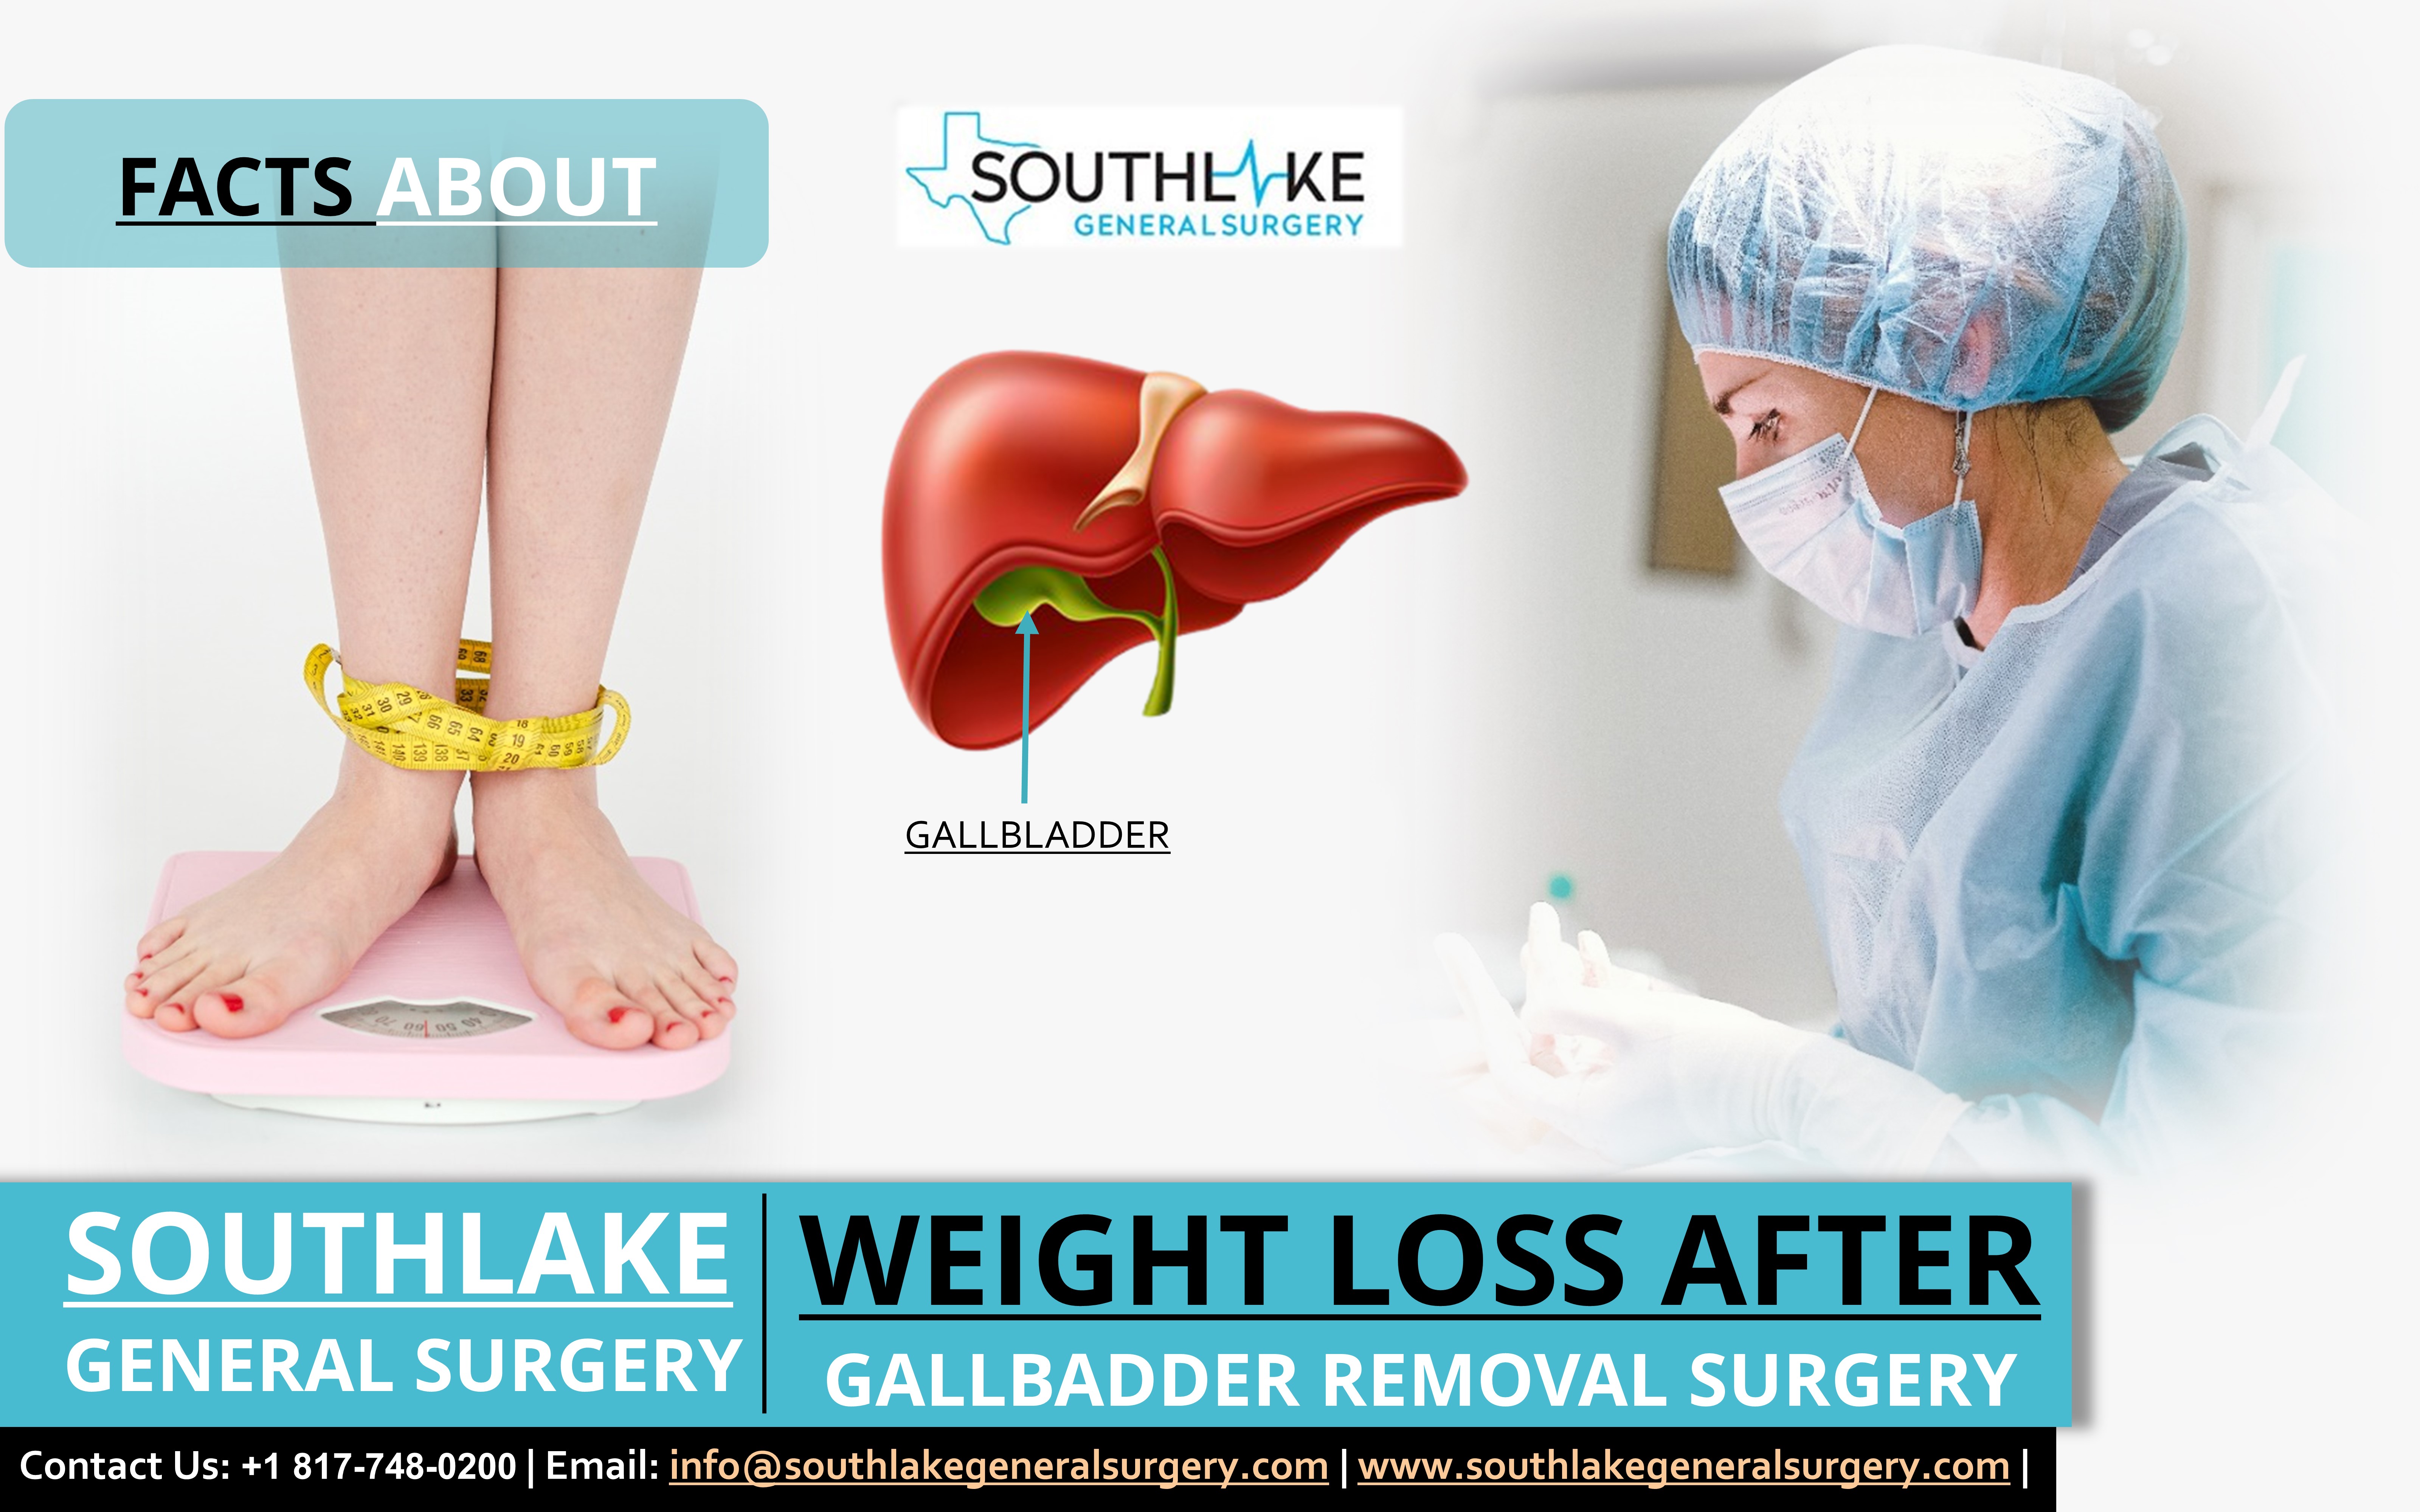 Weight Loss After Gallbladder Removal Surgery - Facts to Know